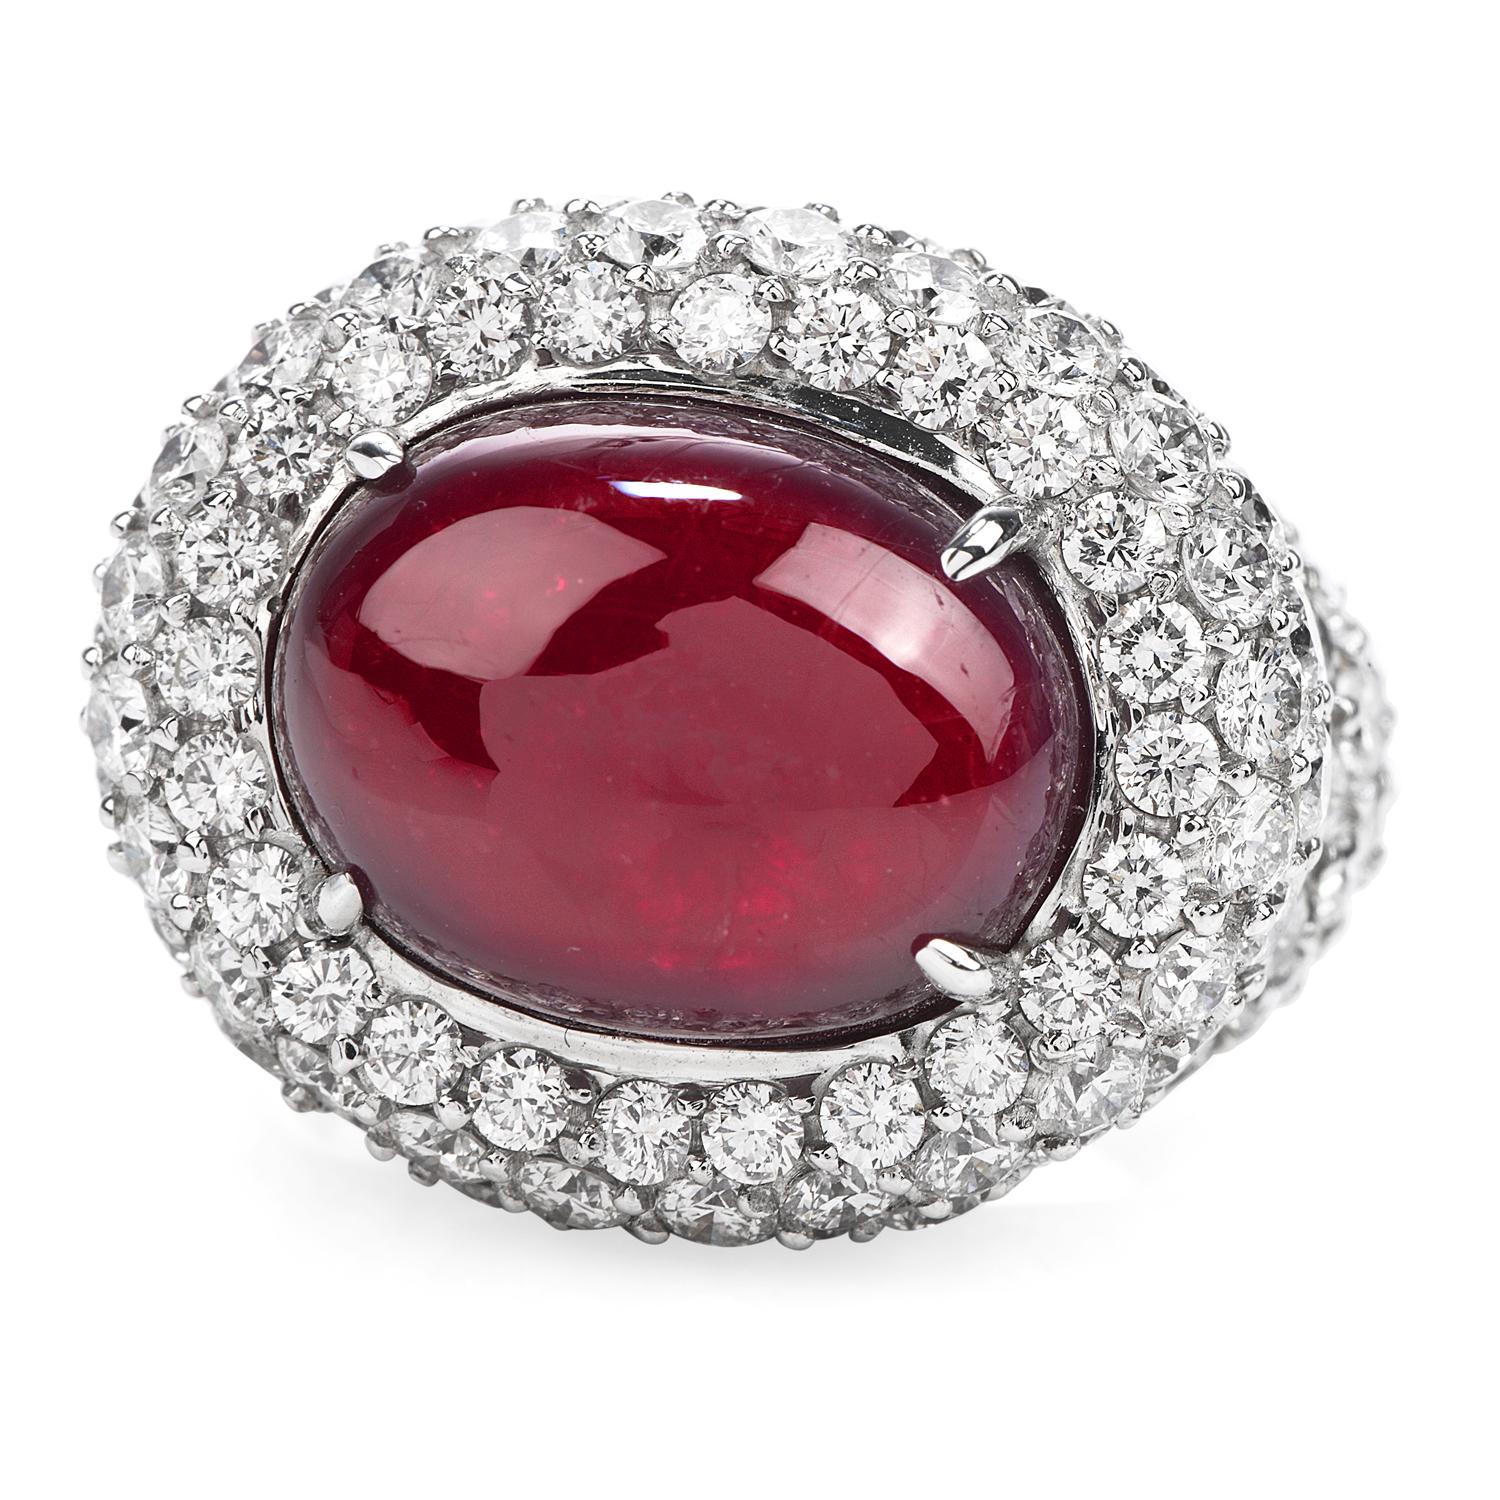 Sumptuous Deep Red Ruby in a Diamond Bed!  This Profound Colored Halo Design Cocktail Ring has a center 14.26 ct Oval Cabochon Ruby, prong set, It is crafted in solid 18K White Gold, and it is adorned by a Cluster Pave Style Round Cut Diamonds, with